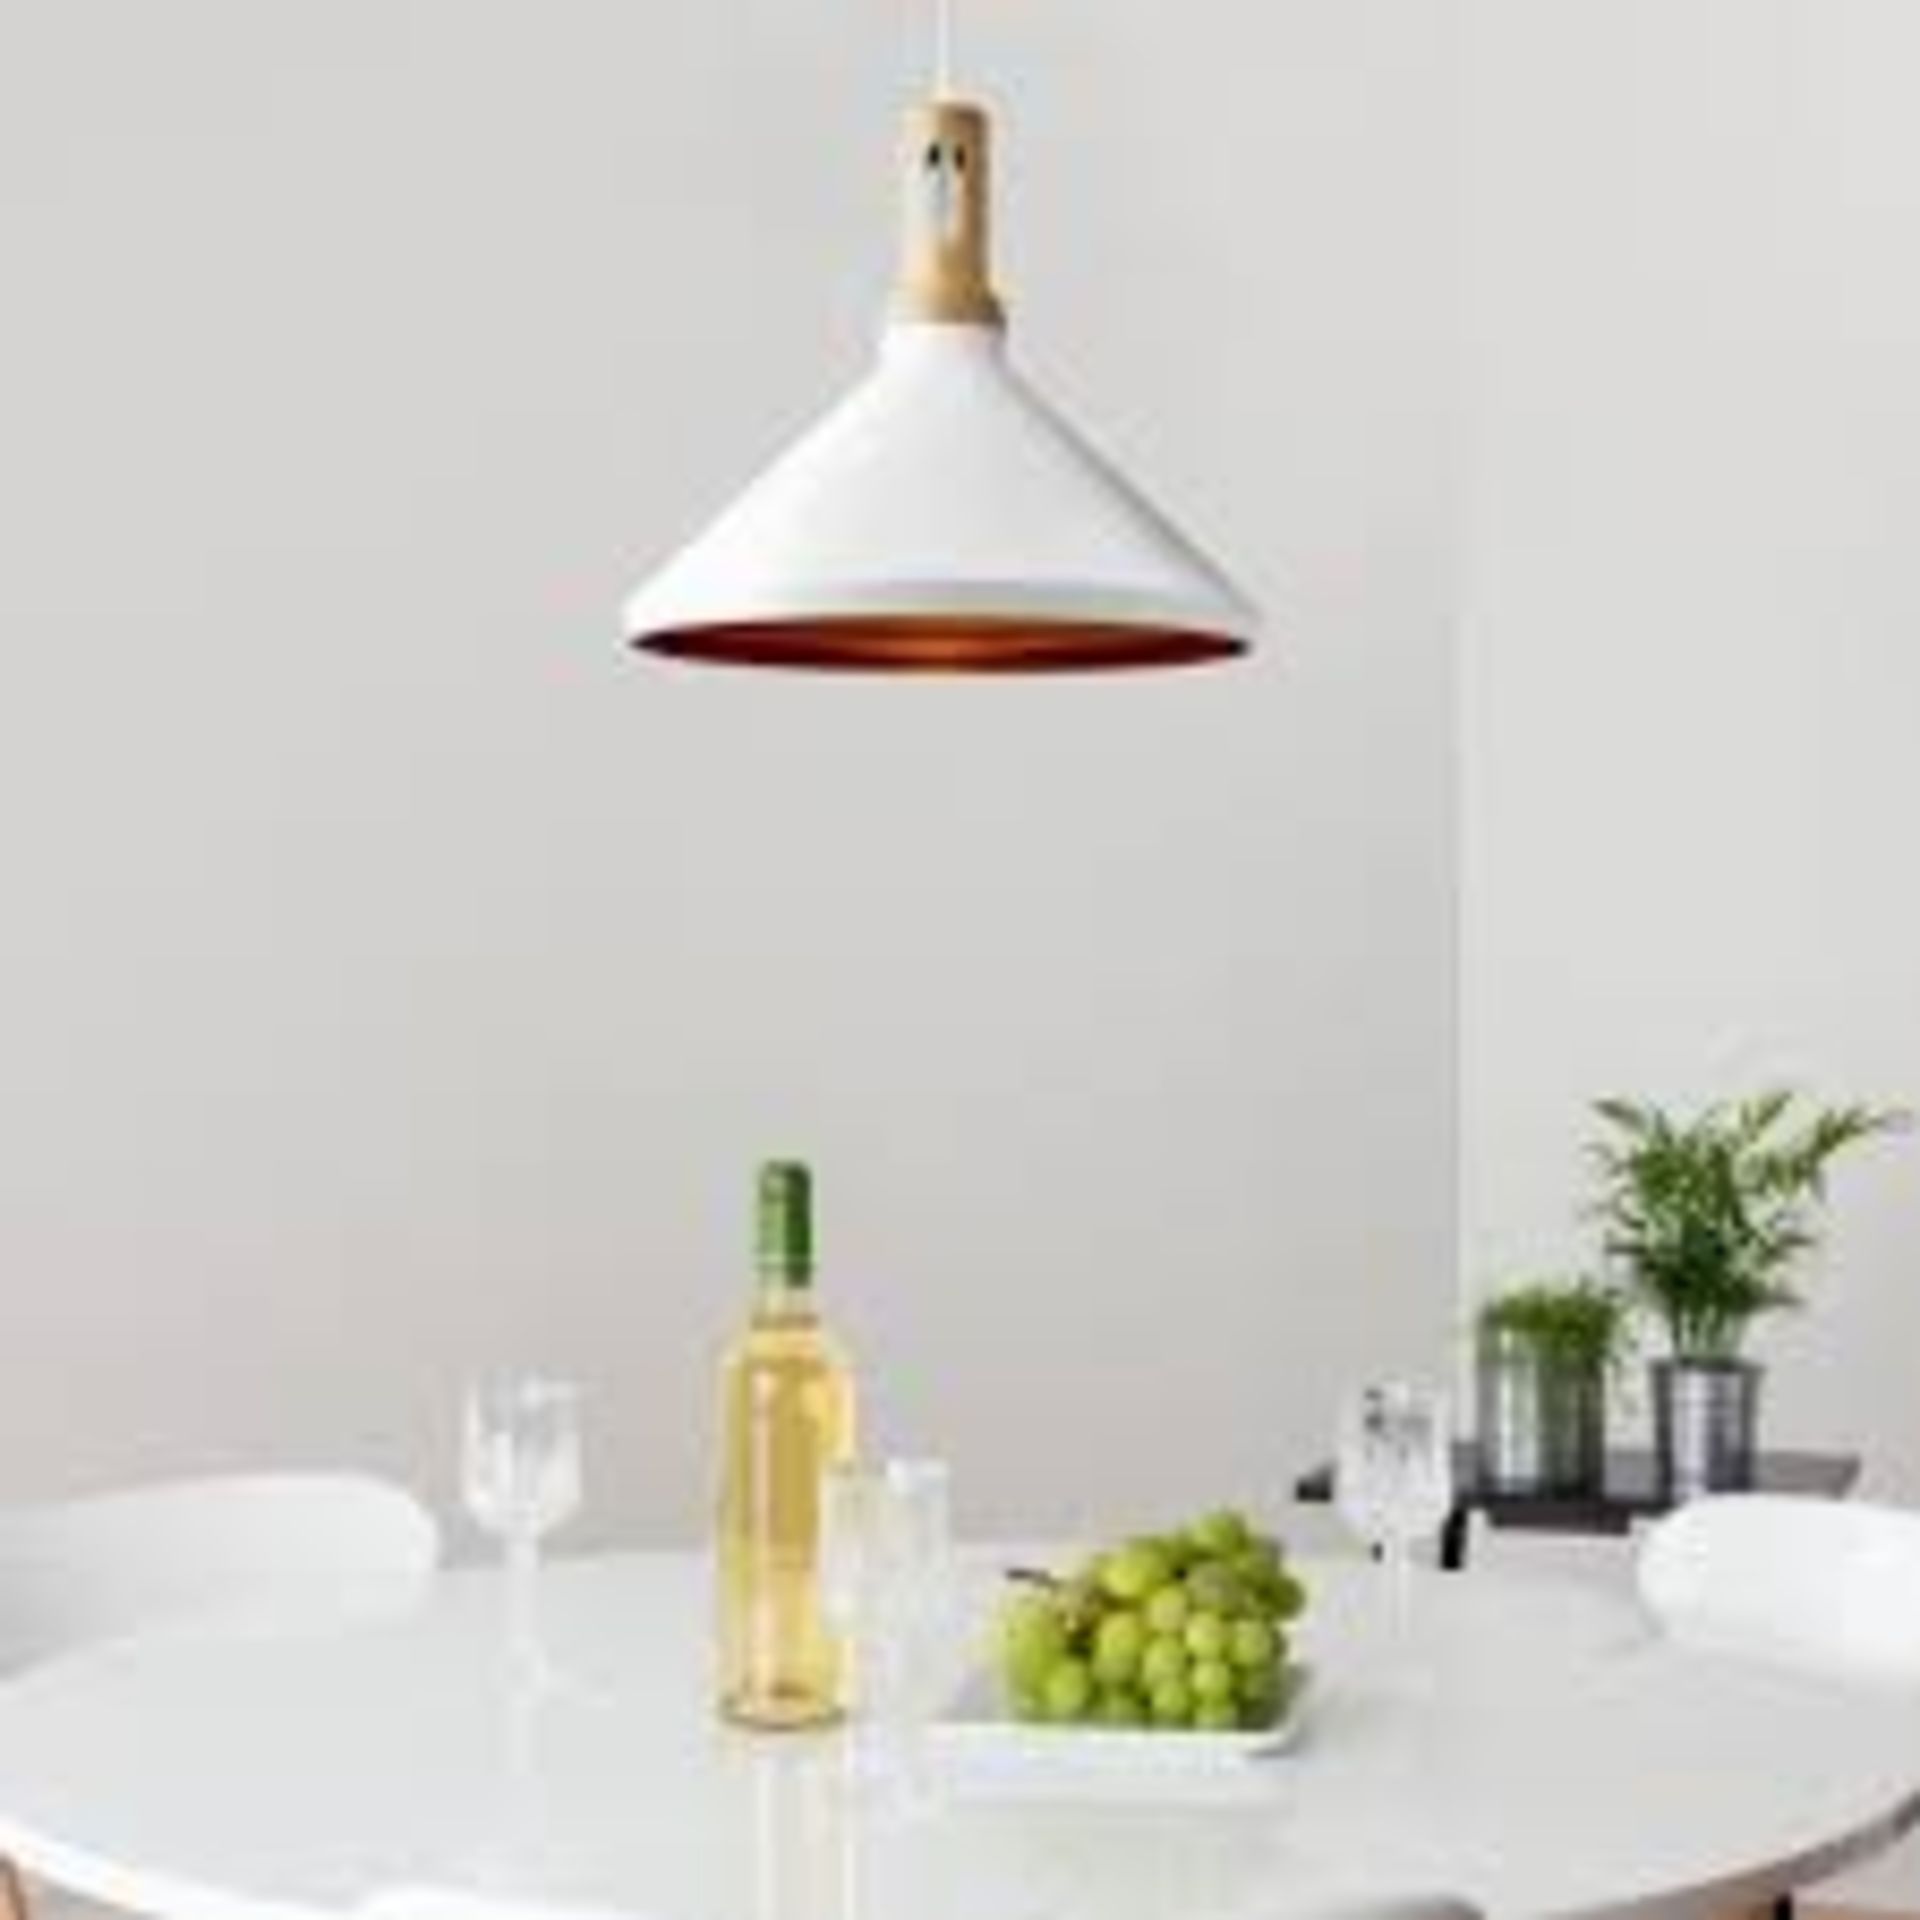 1 x Searchlight 1 Light Cone Pendant in white - Ref: 7051WH - New and Boxed - RRP: £85.00 - Image 4 of 4